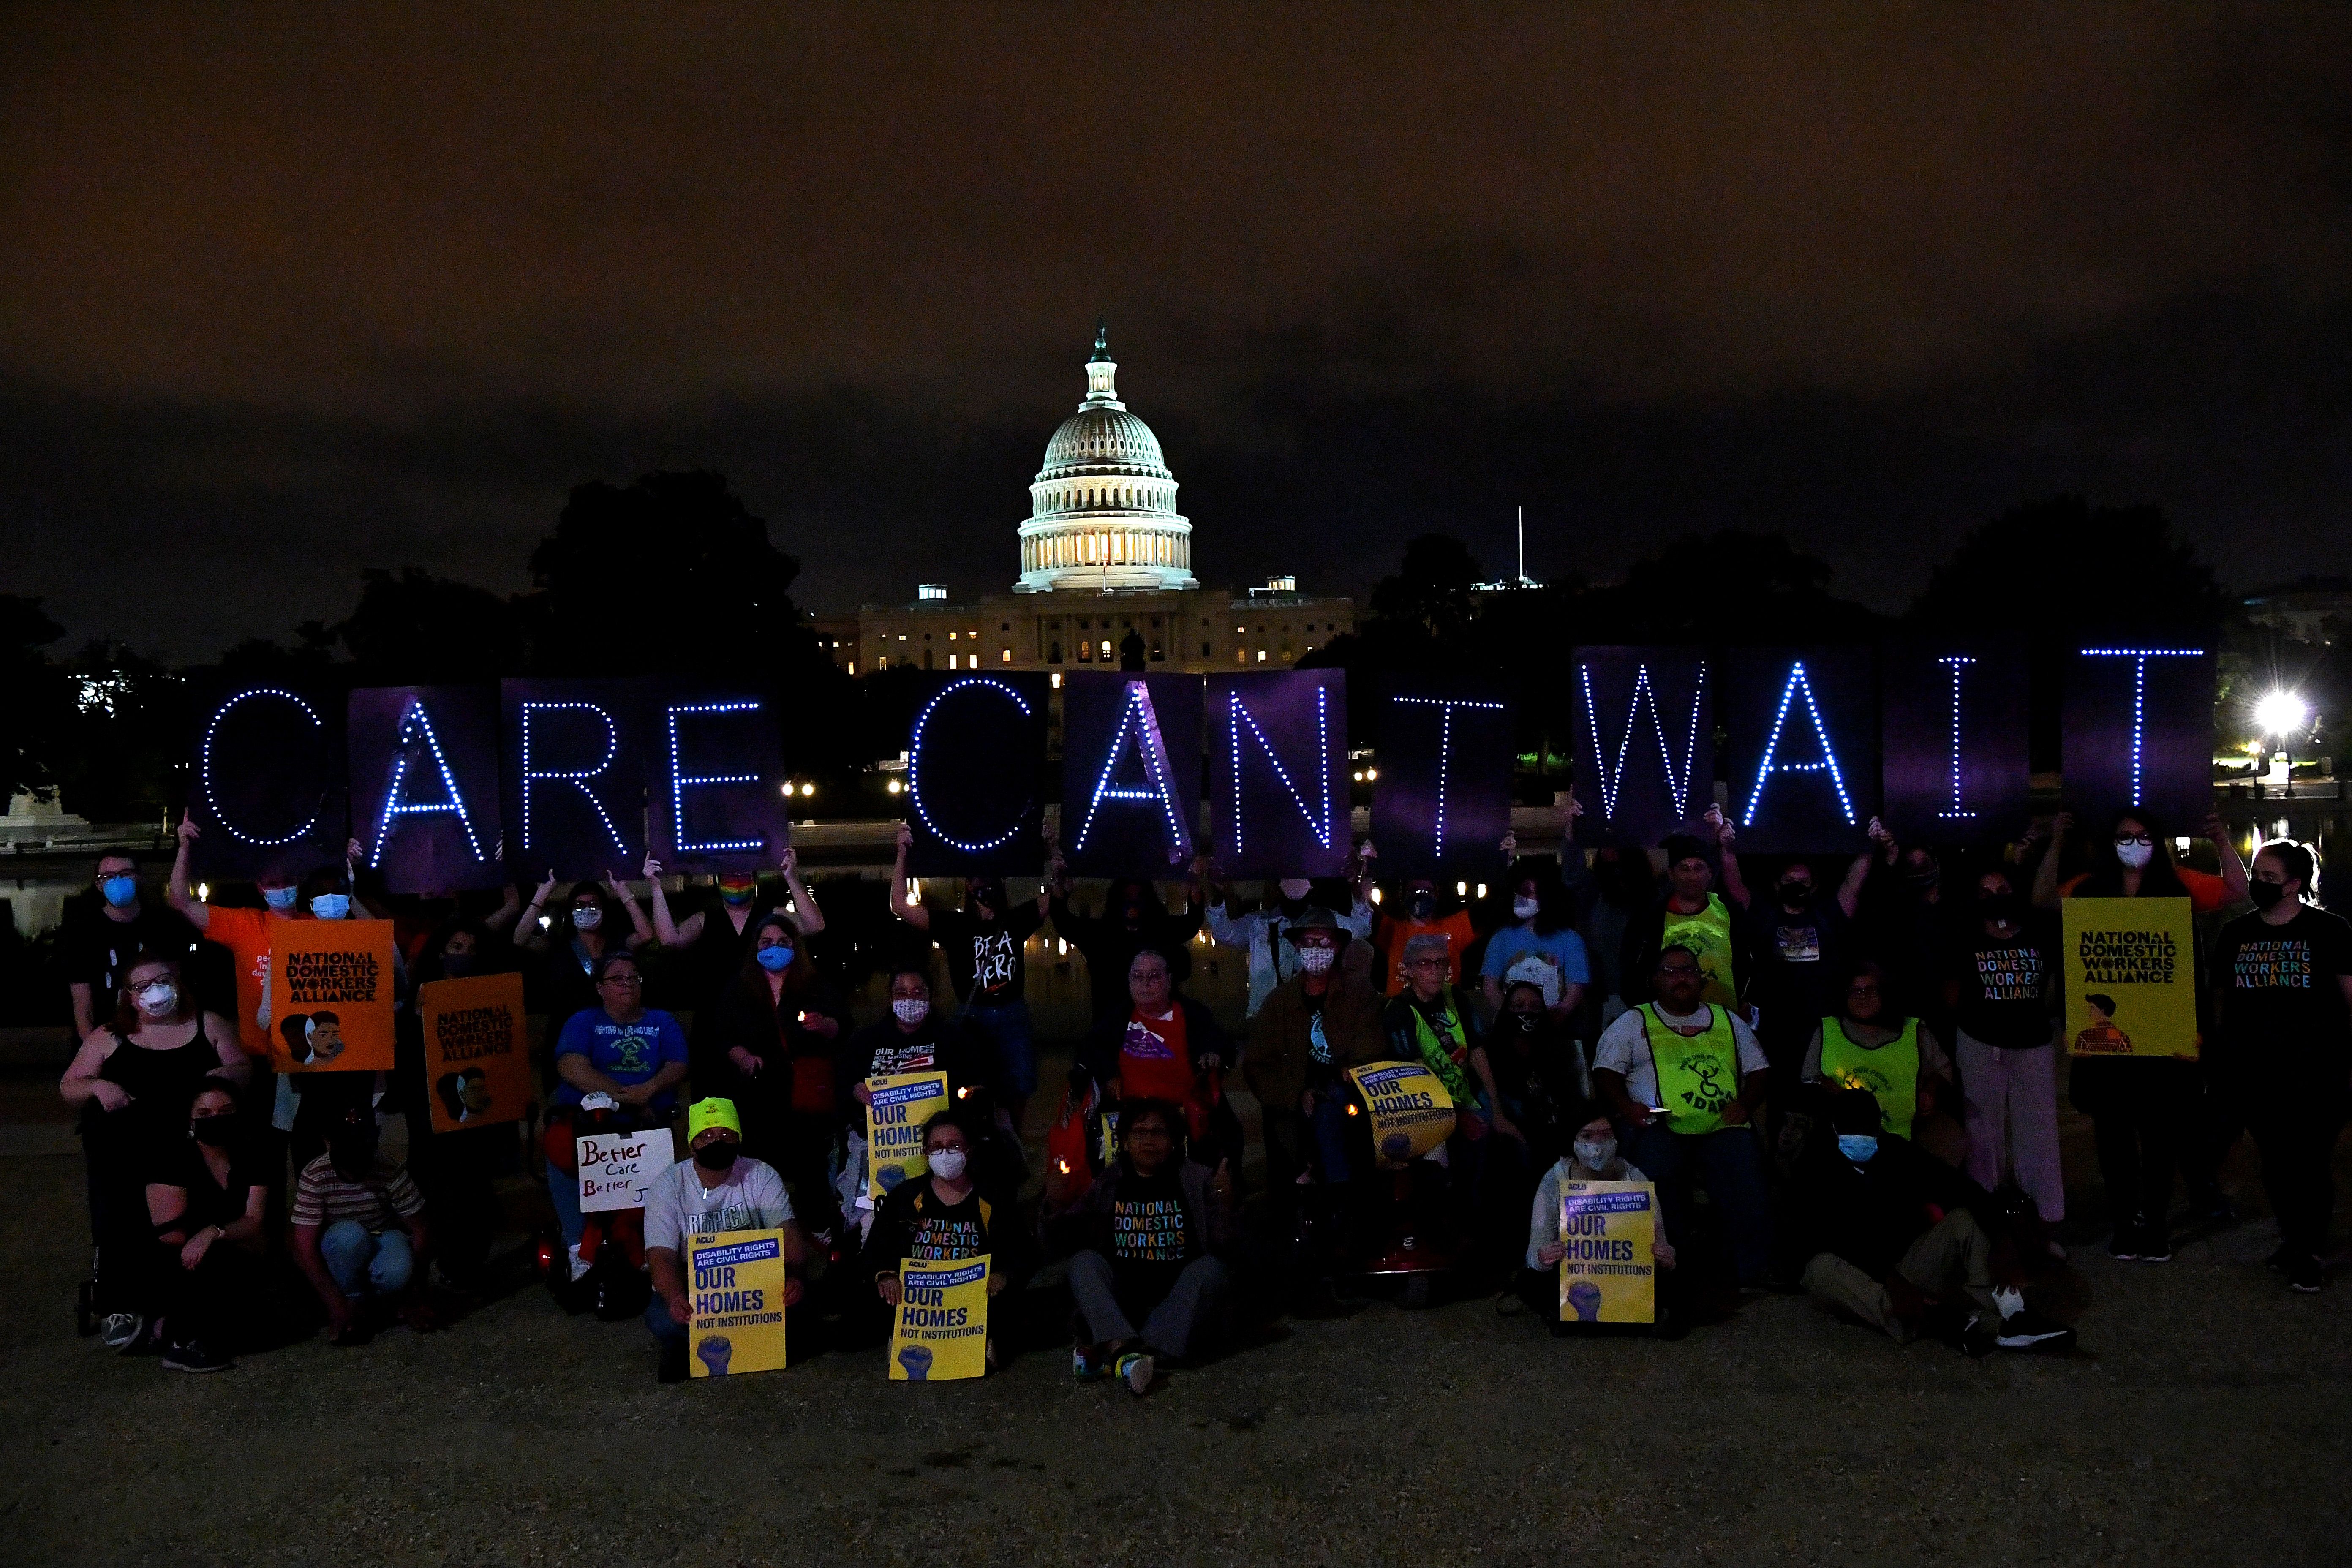 Crowds hold illuminated signs in front of the US Capitol at night. "Care Can't Wait".